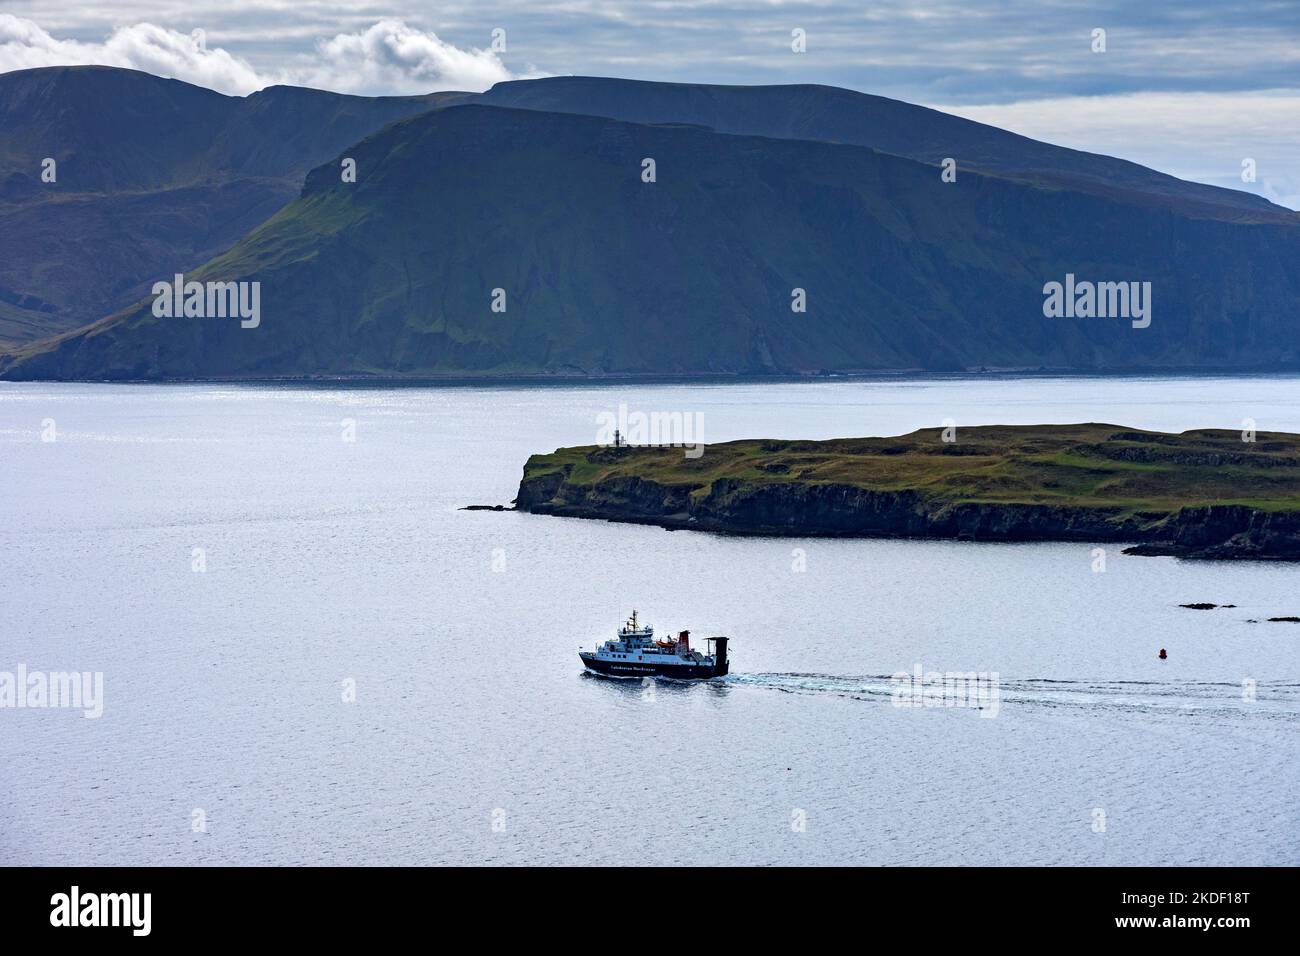 The Caledonian MacBrayne Small Isles ferry, the MV Lochnevis, leaving the harbour, Isle of Canna, Scotland, UK.  The mountains of Rum behind. Stock Photo